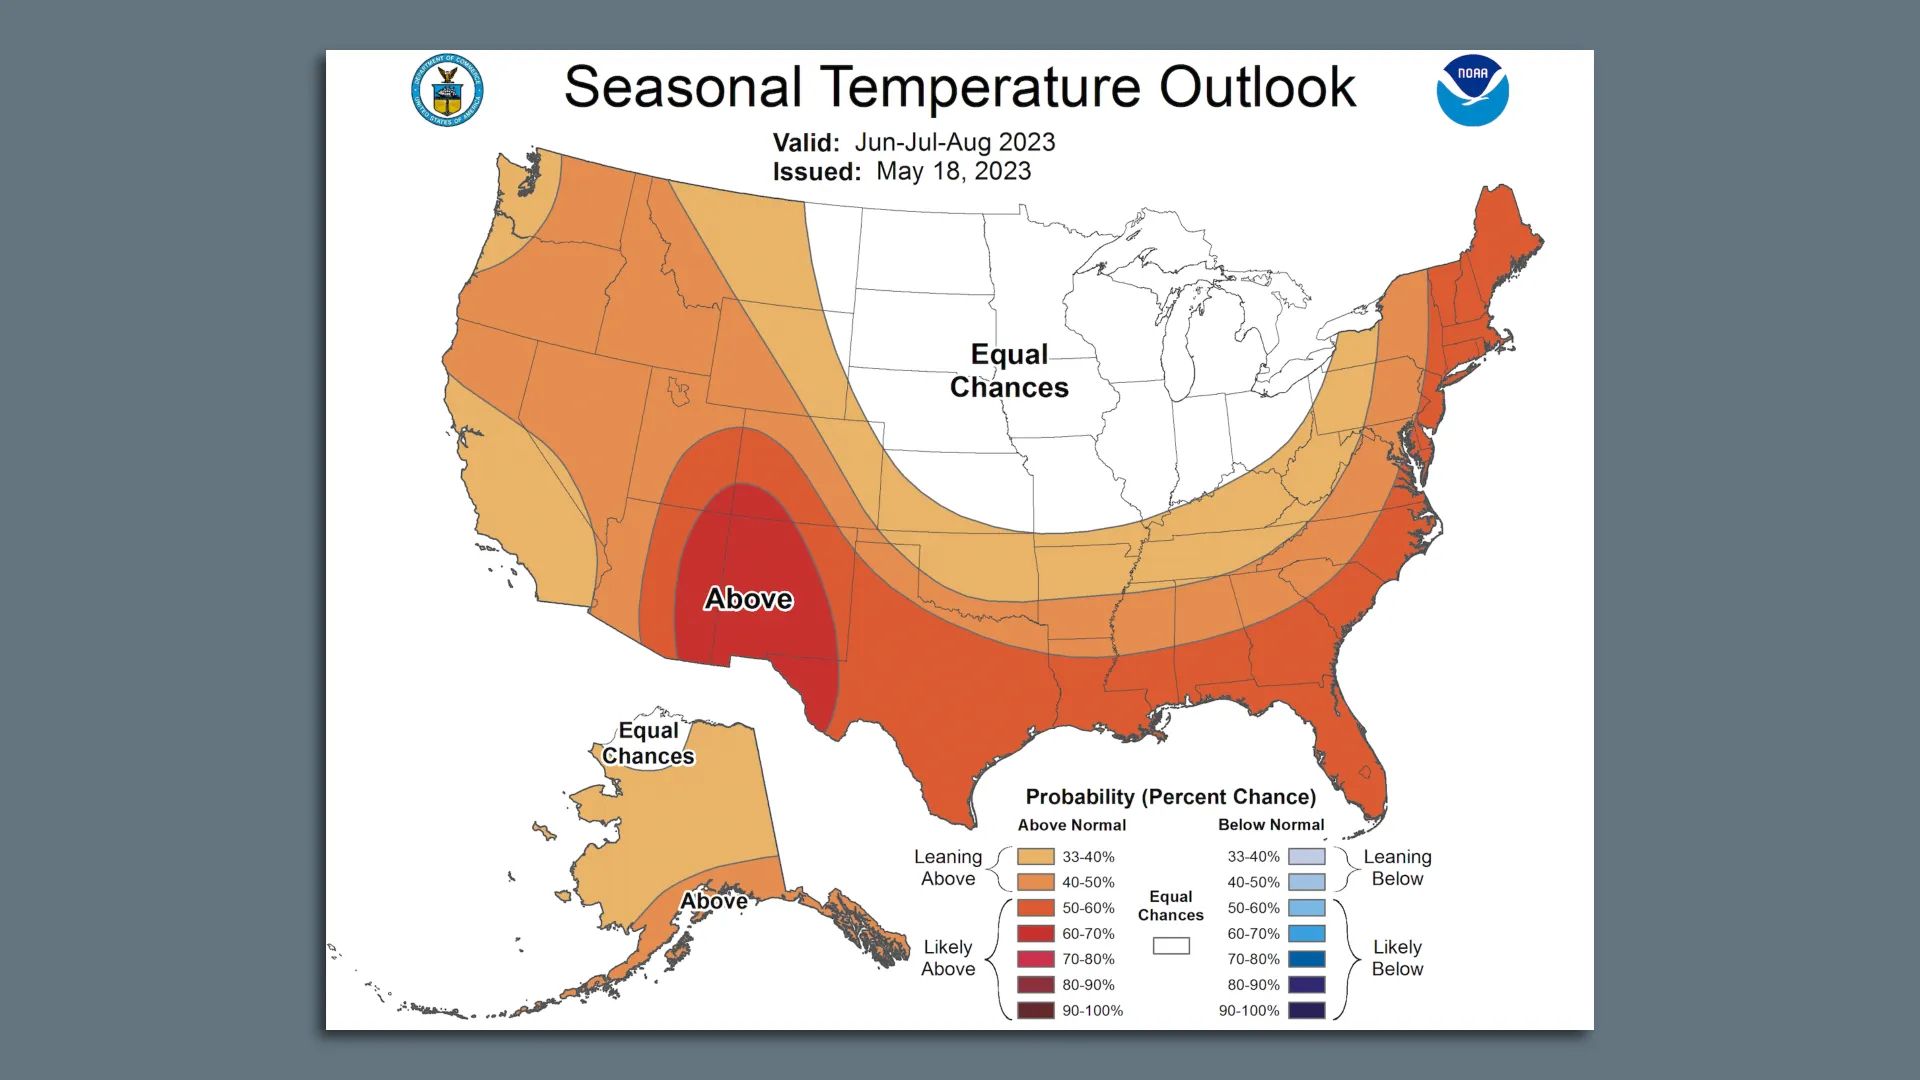 The image is a map of the United States. Parts of it are highlighted in white and various shades of red and orange, indicating the likelihood of above average temperatures this summer. Louisiana is in the "likely above" category.